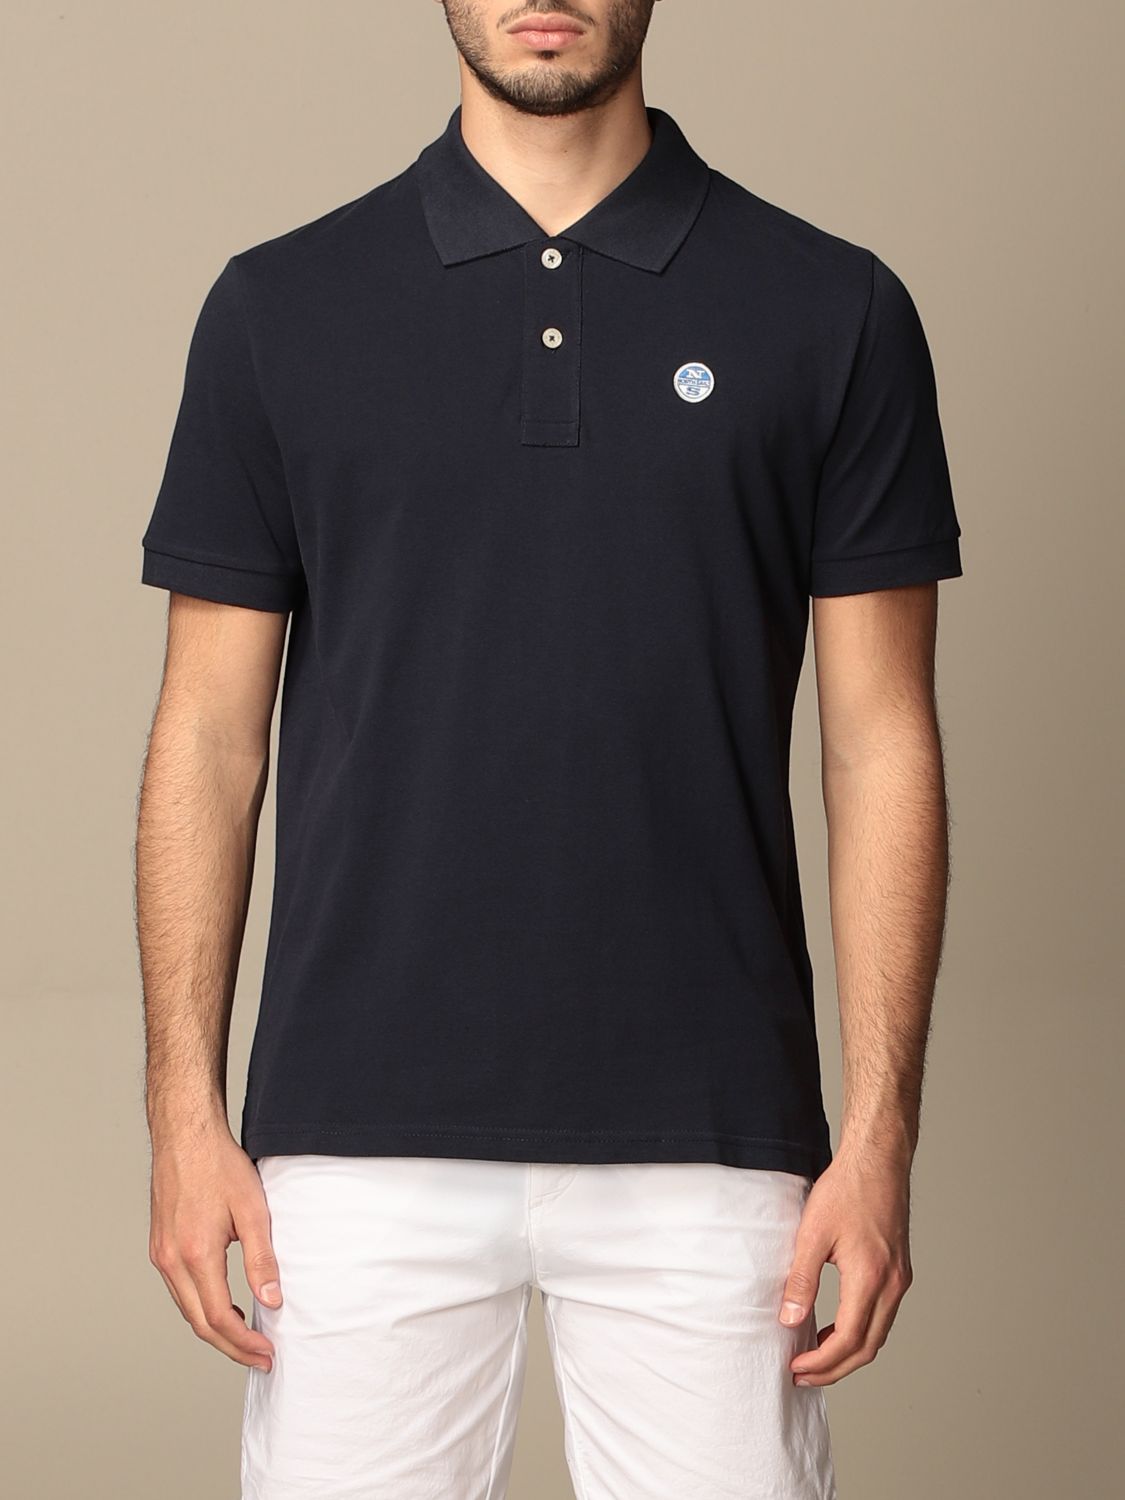 Polo shirt North Sails: North Sails polo shirt in cotton with logo navy 1